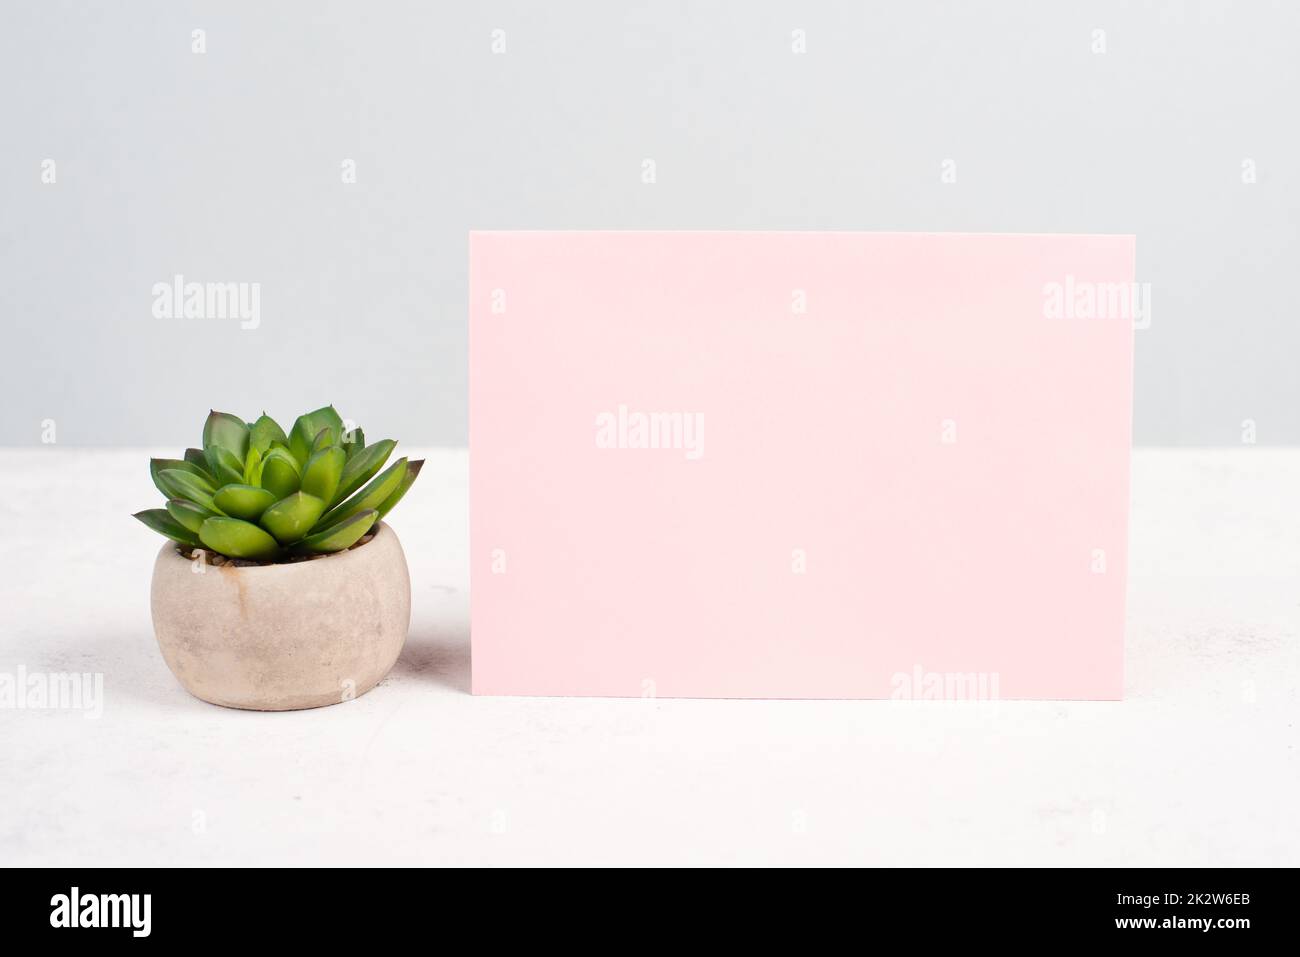 Empty paper with a cactus textured background, brainstorming for new ideas, writing a message, home office desk Stock Photo